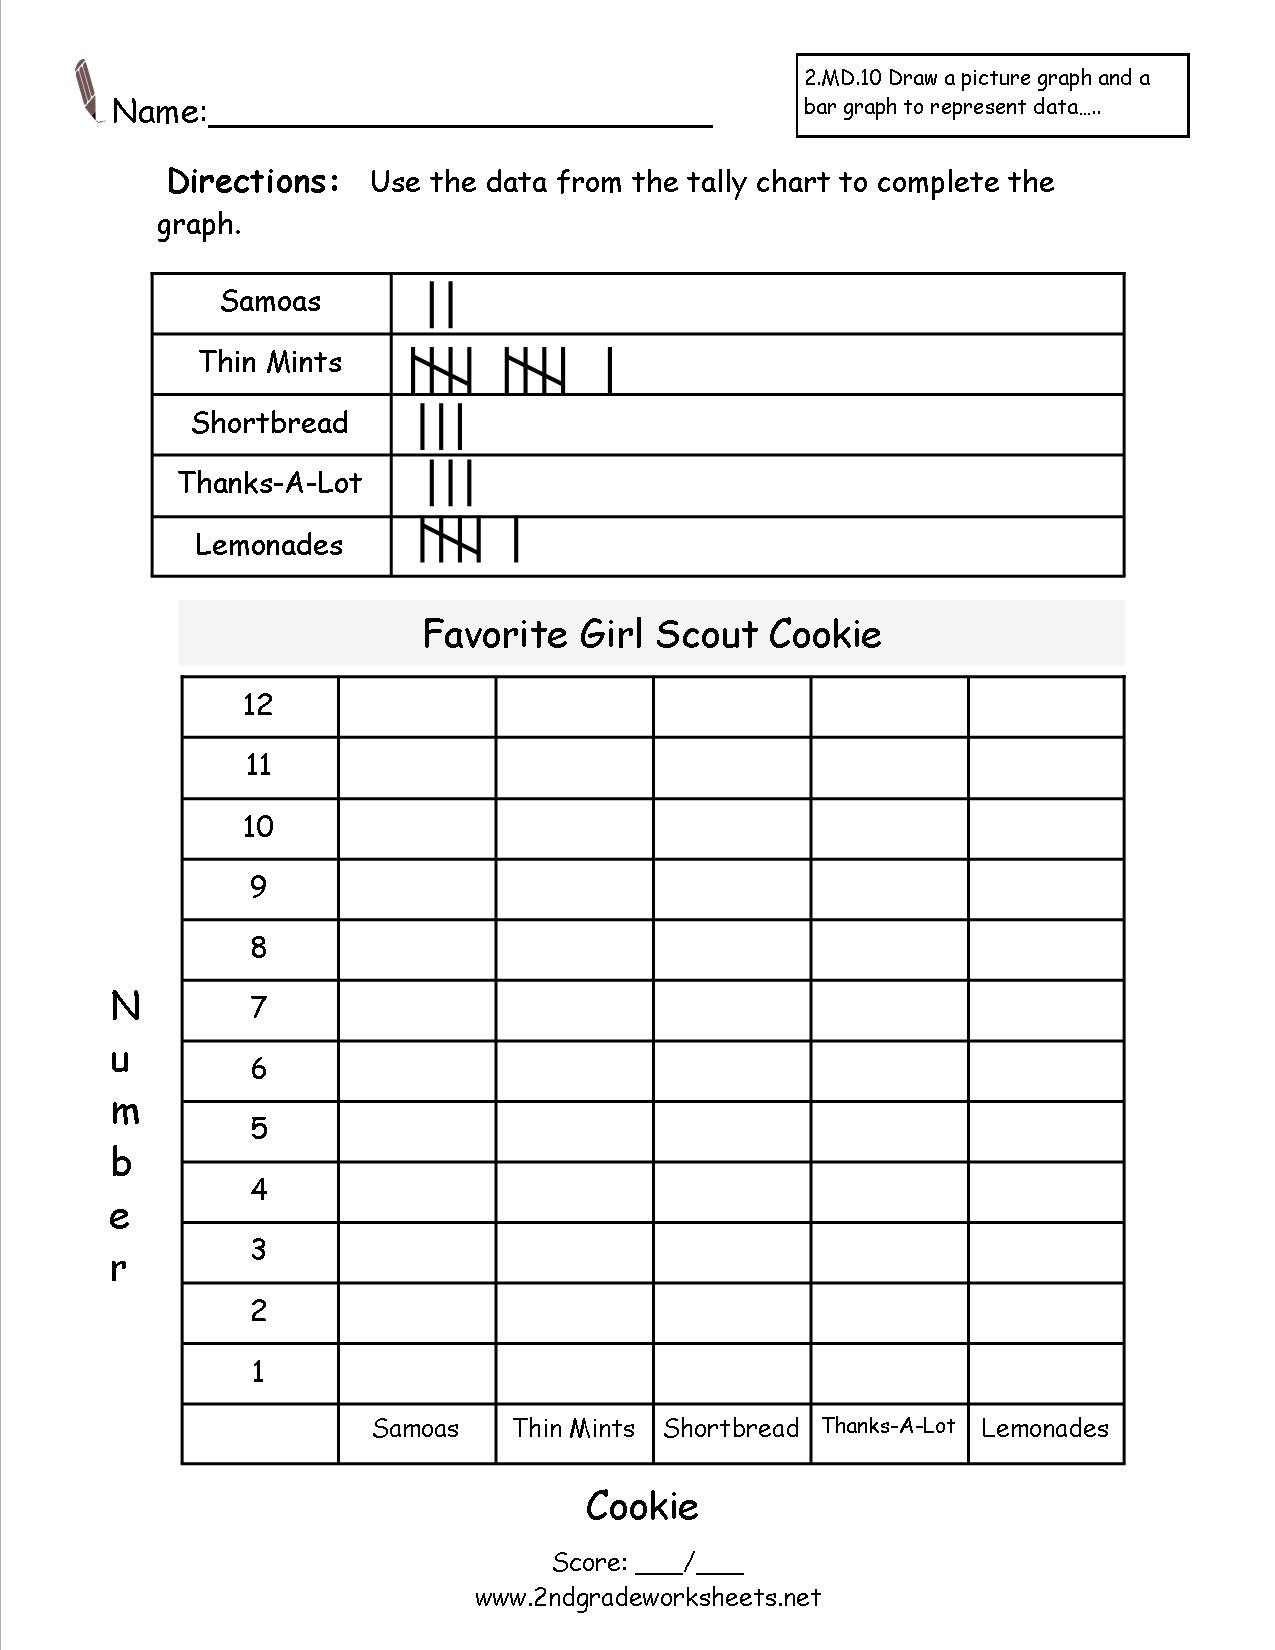 Pictograph Worksheets 2nd Grade Bar Graphs and Pictographs Lessons Tes Teach